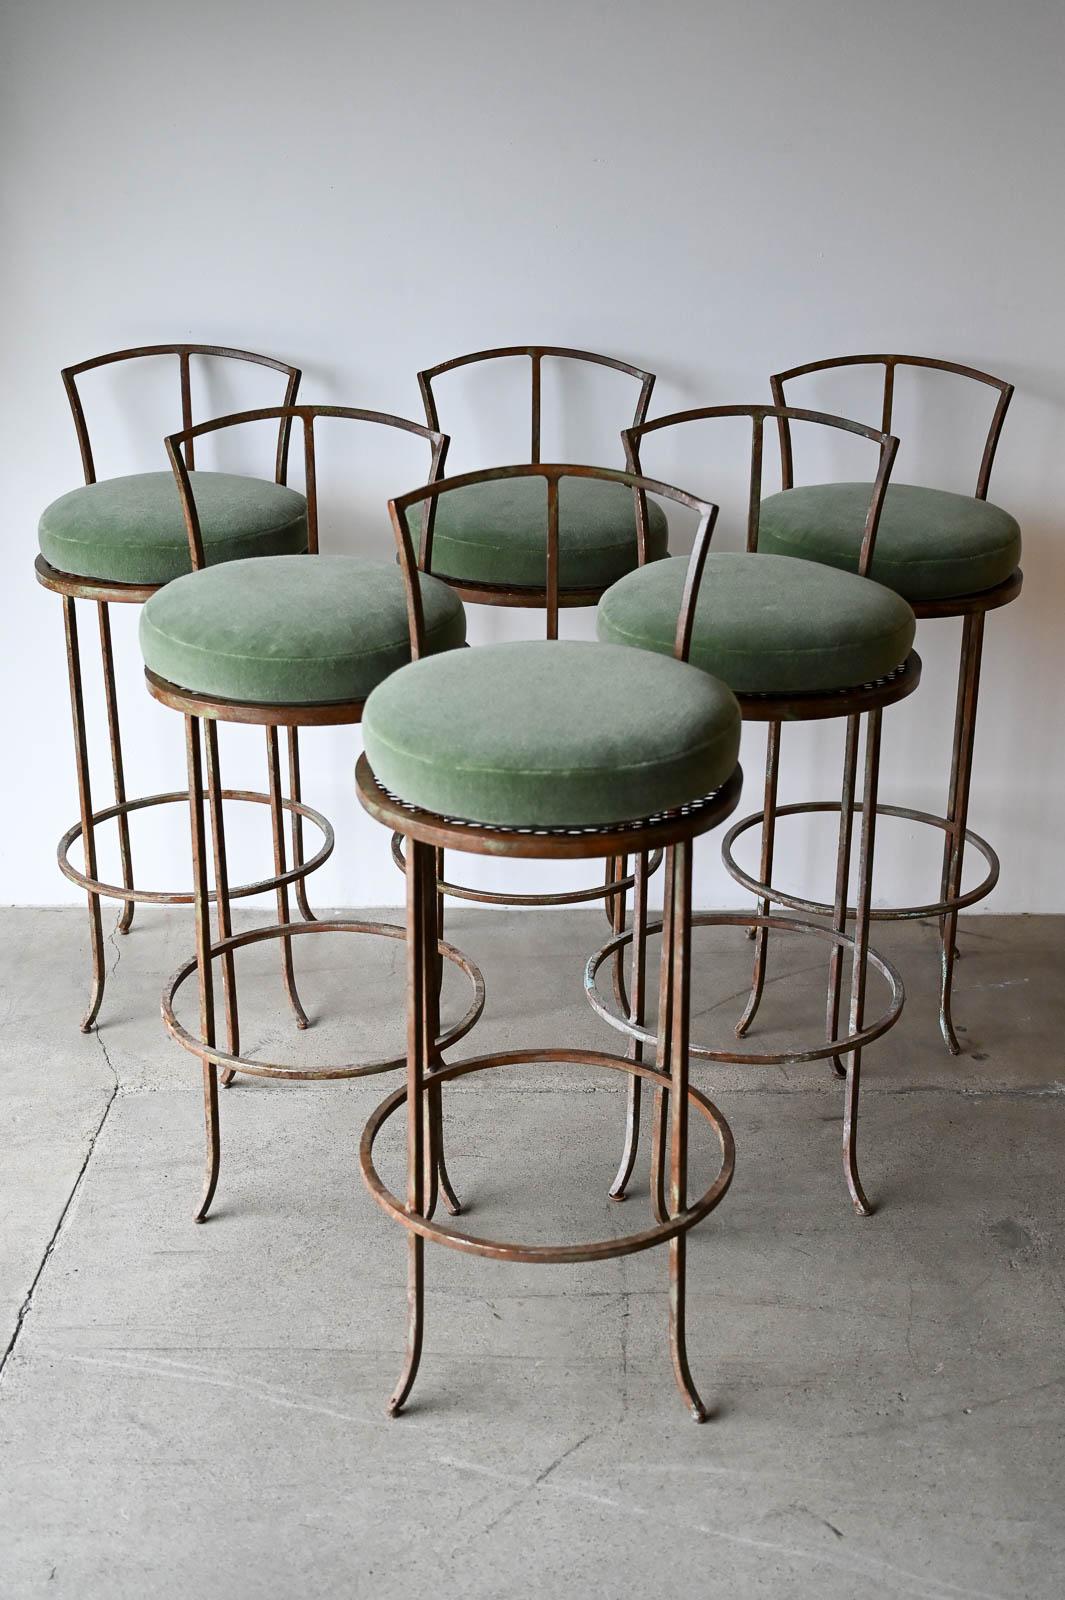 American Set of 6 Vintage Iron and Mohair Barstools